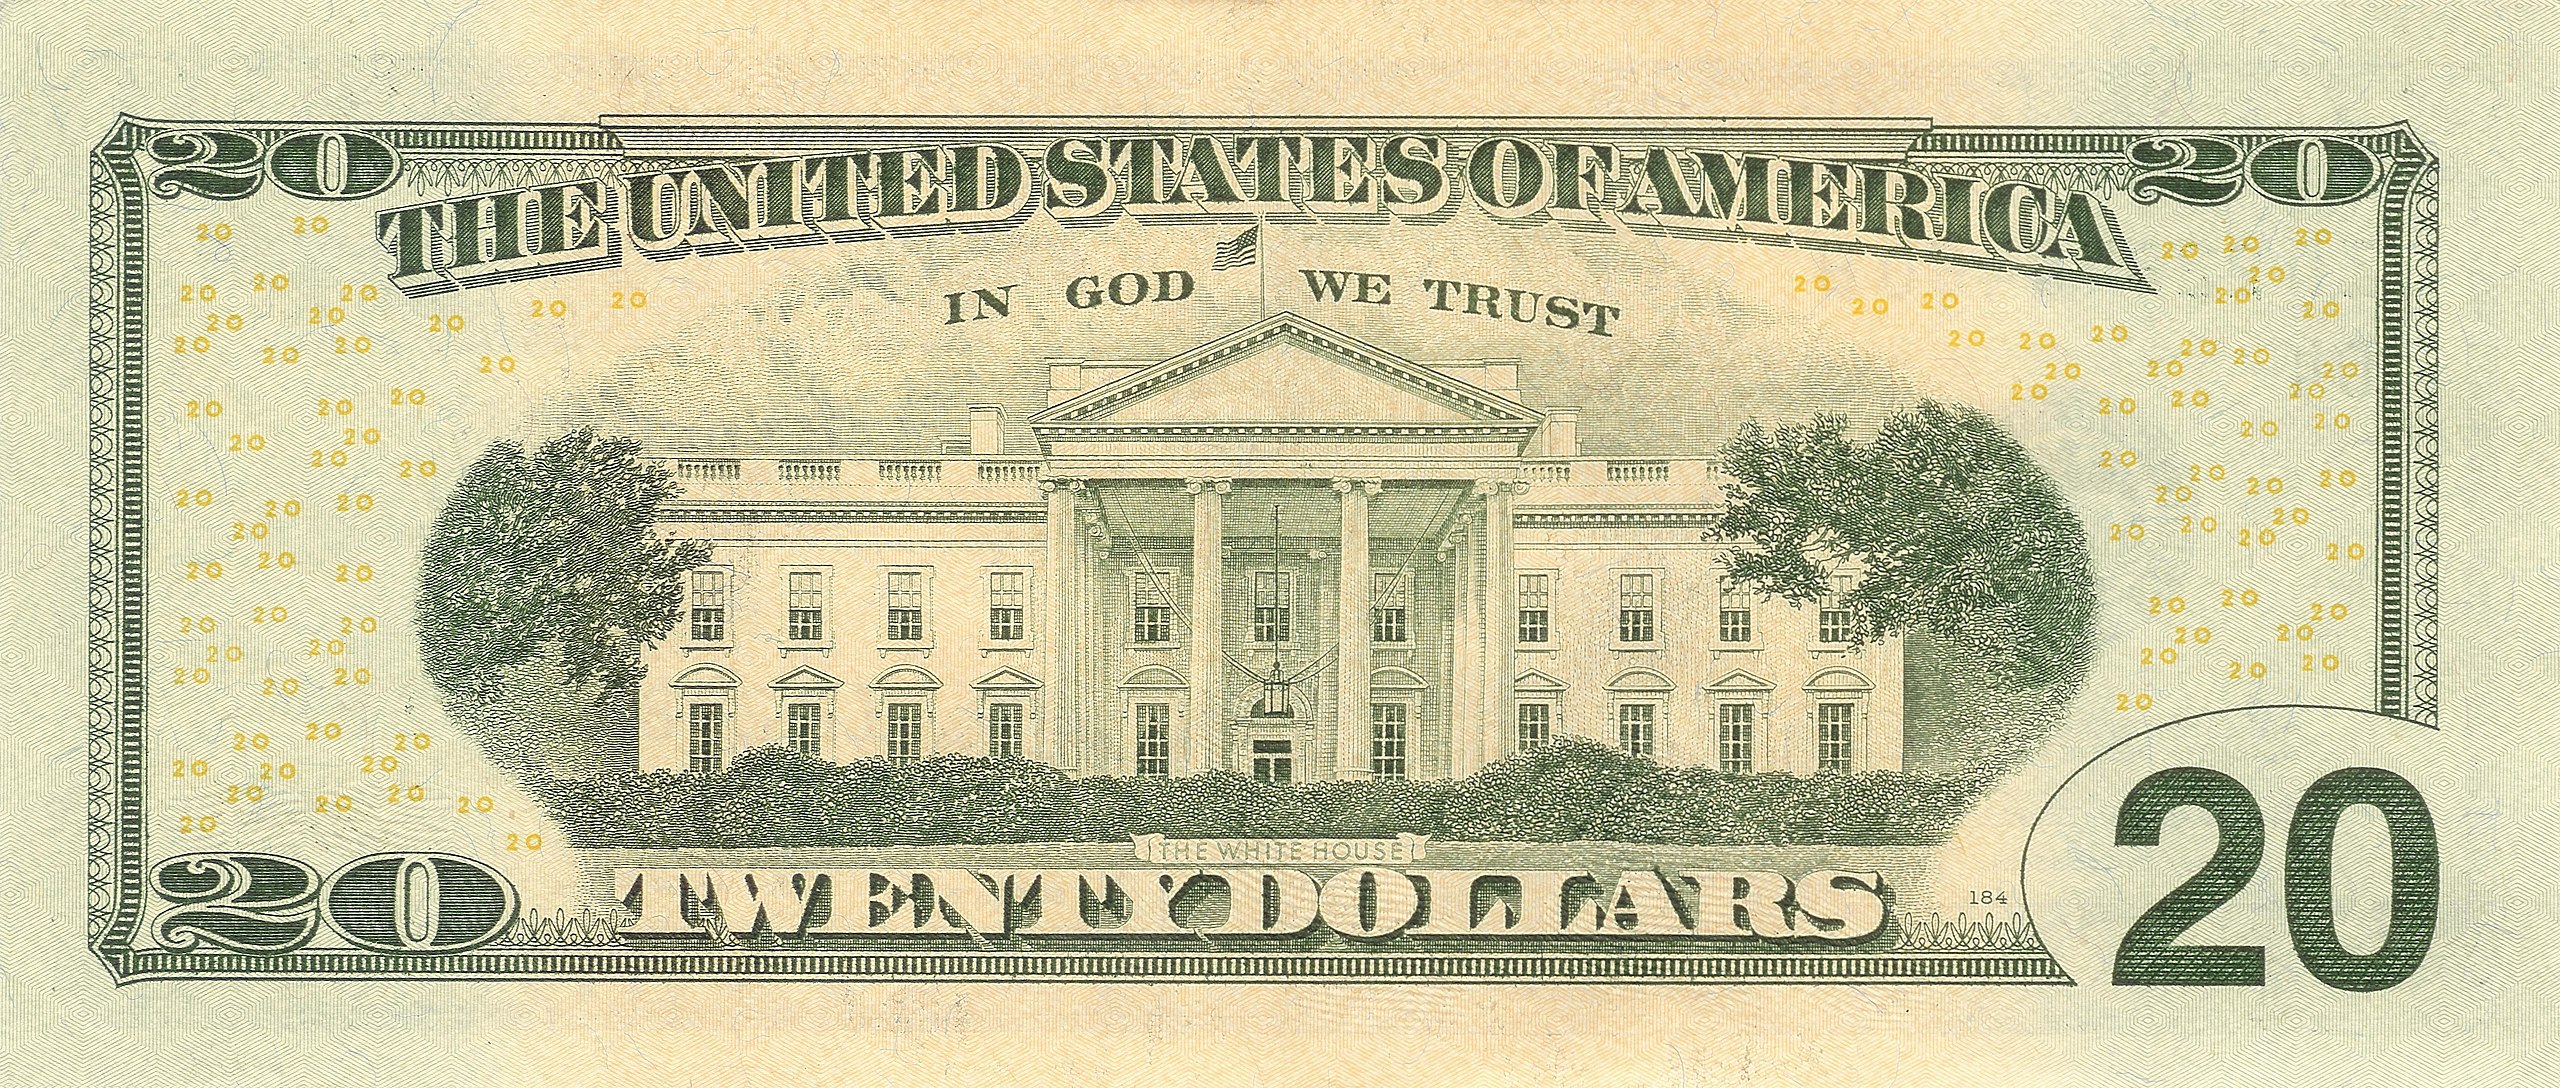 Which Landmark Appears On The Back Of The $20 Bill?